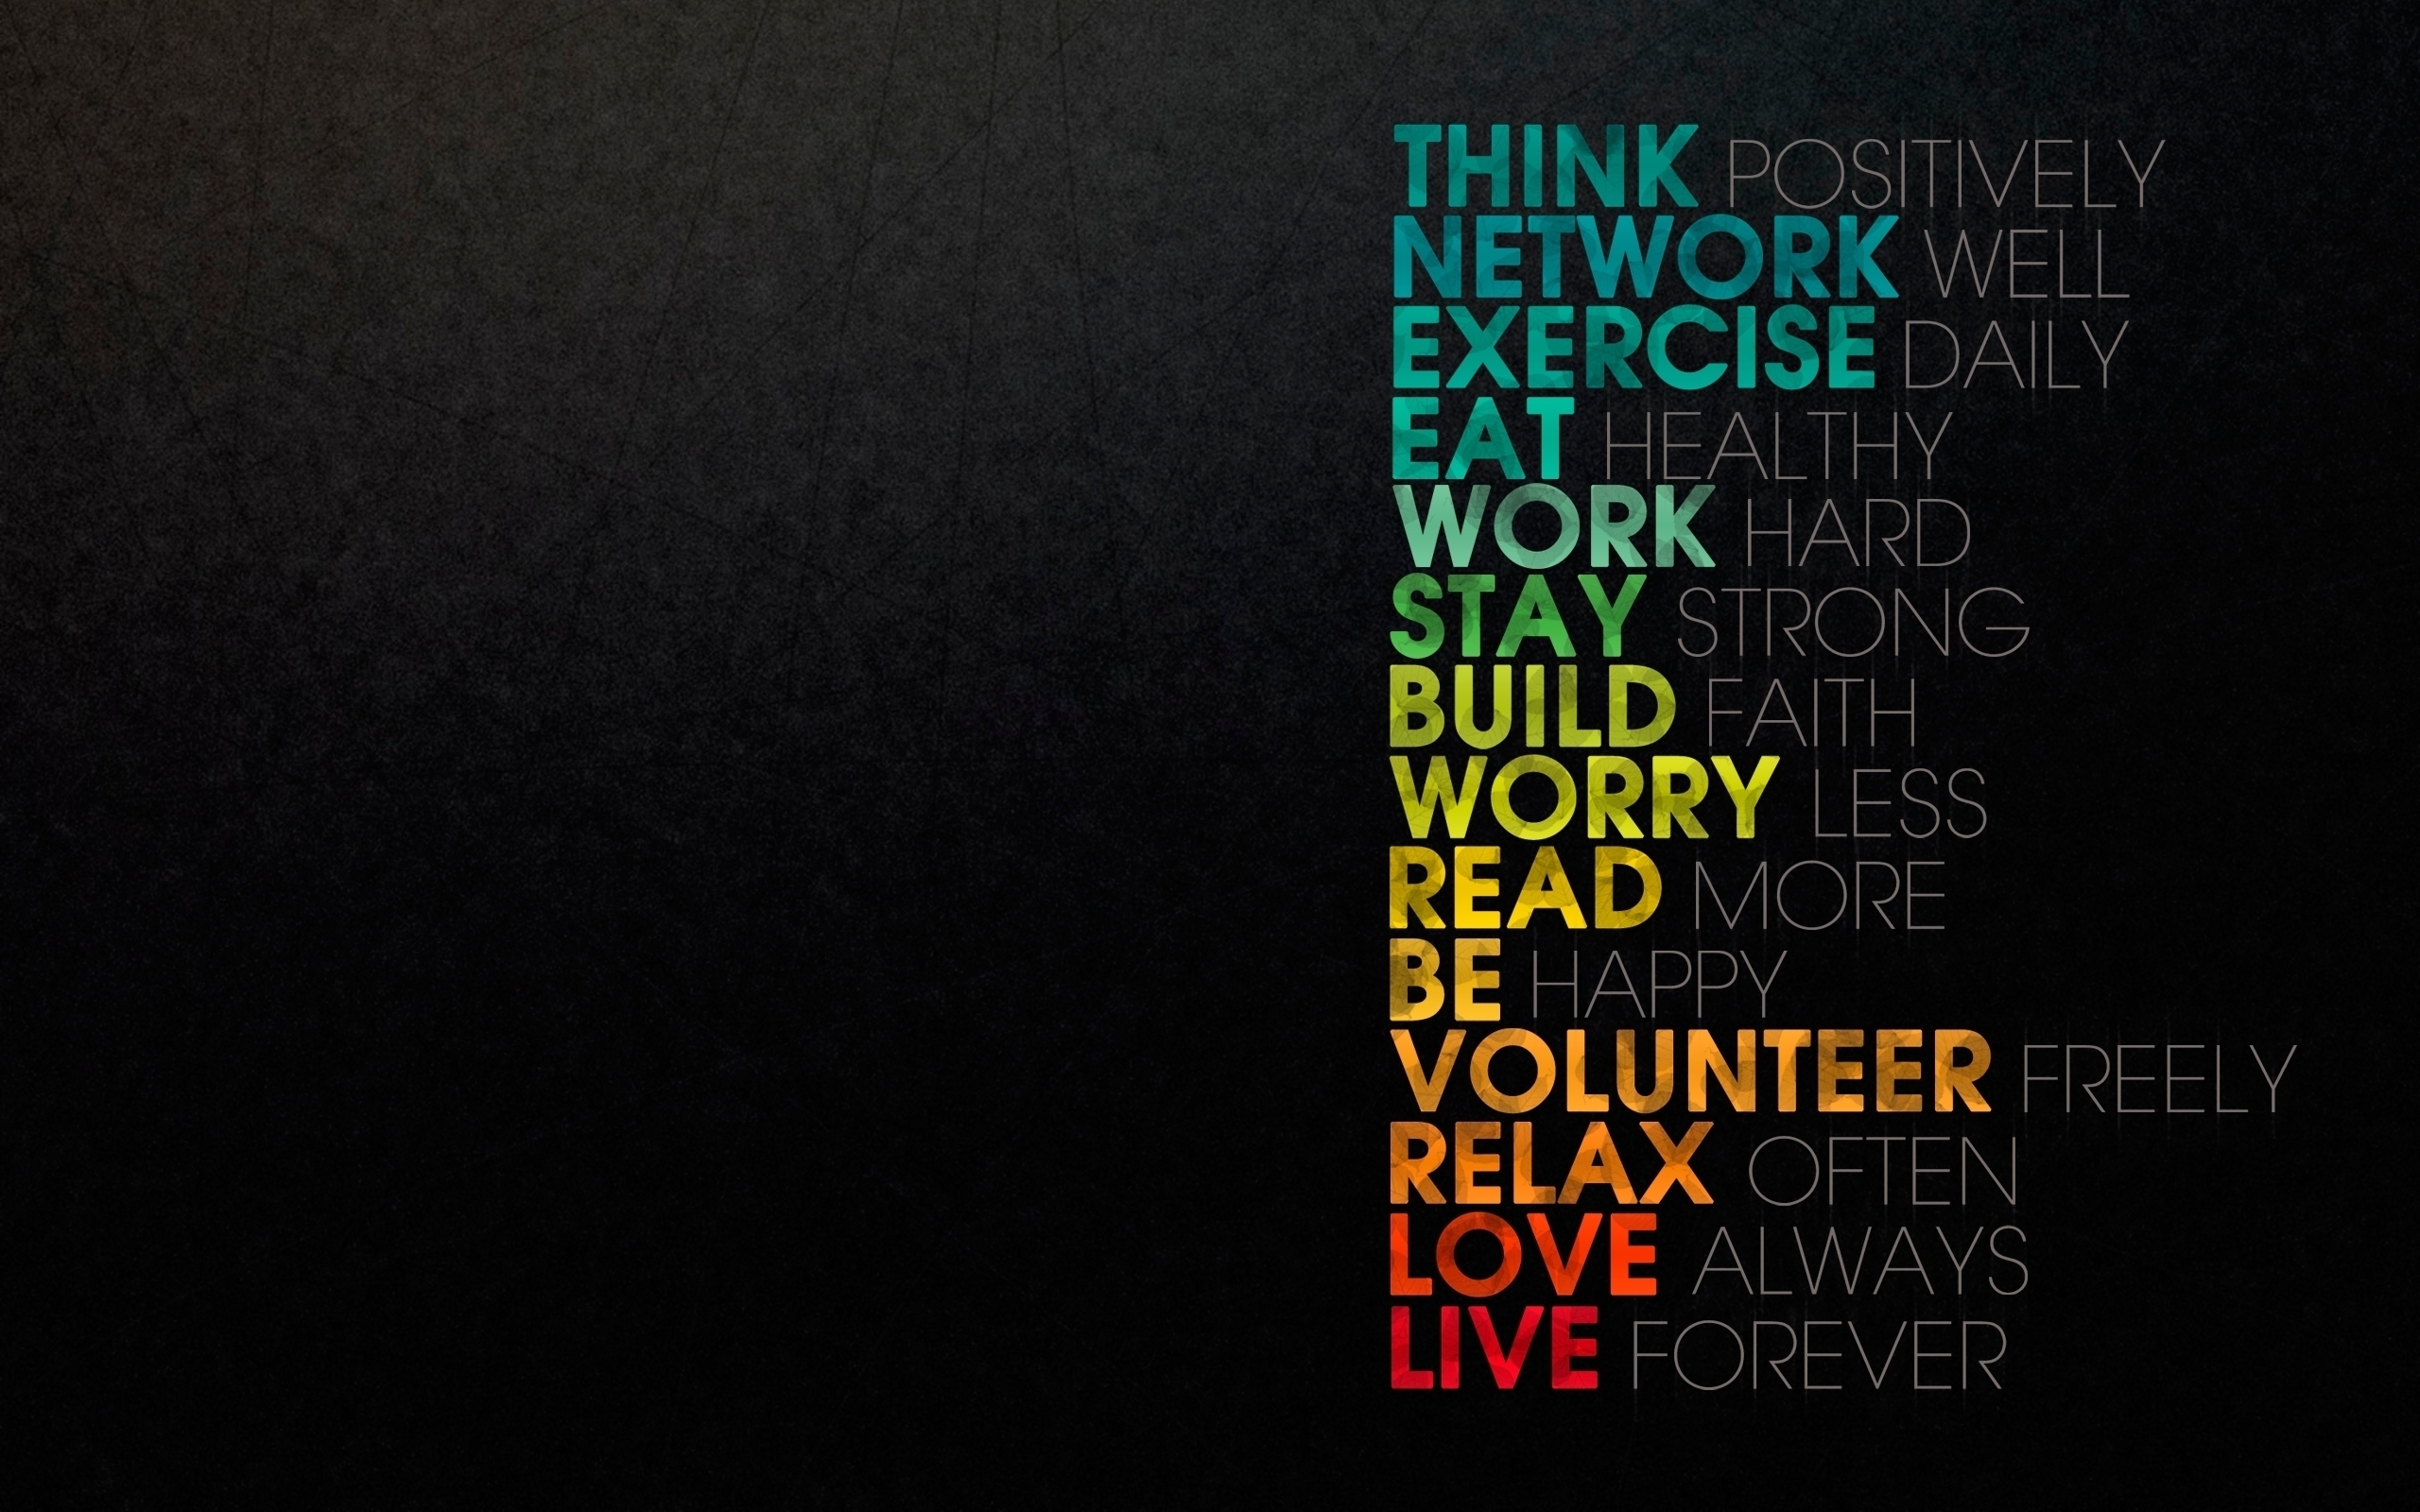 Think Positively for 2560 x 1600 widescreen resolution